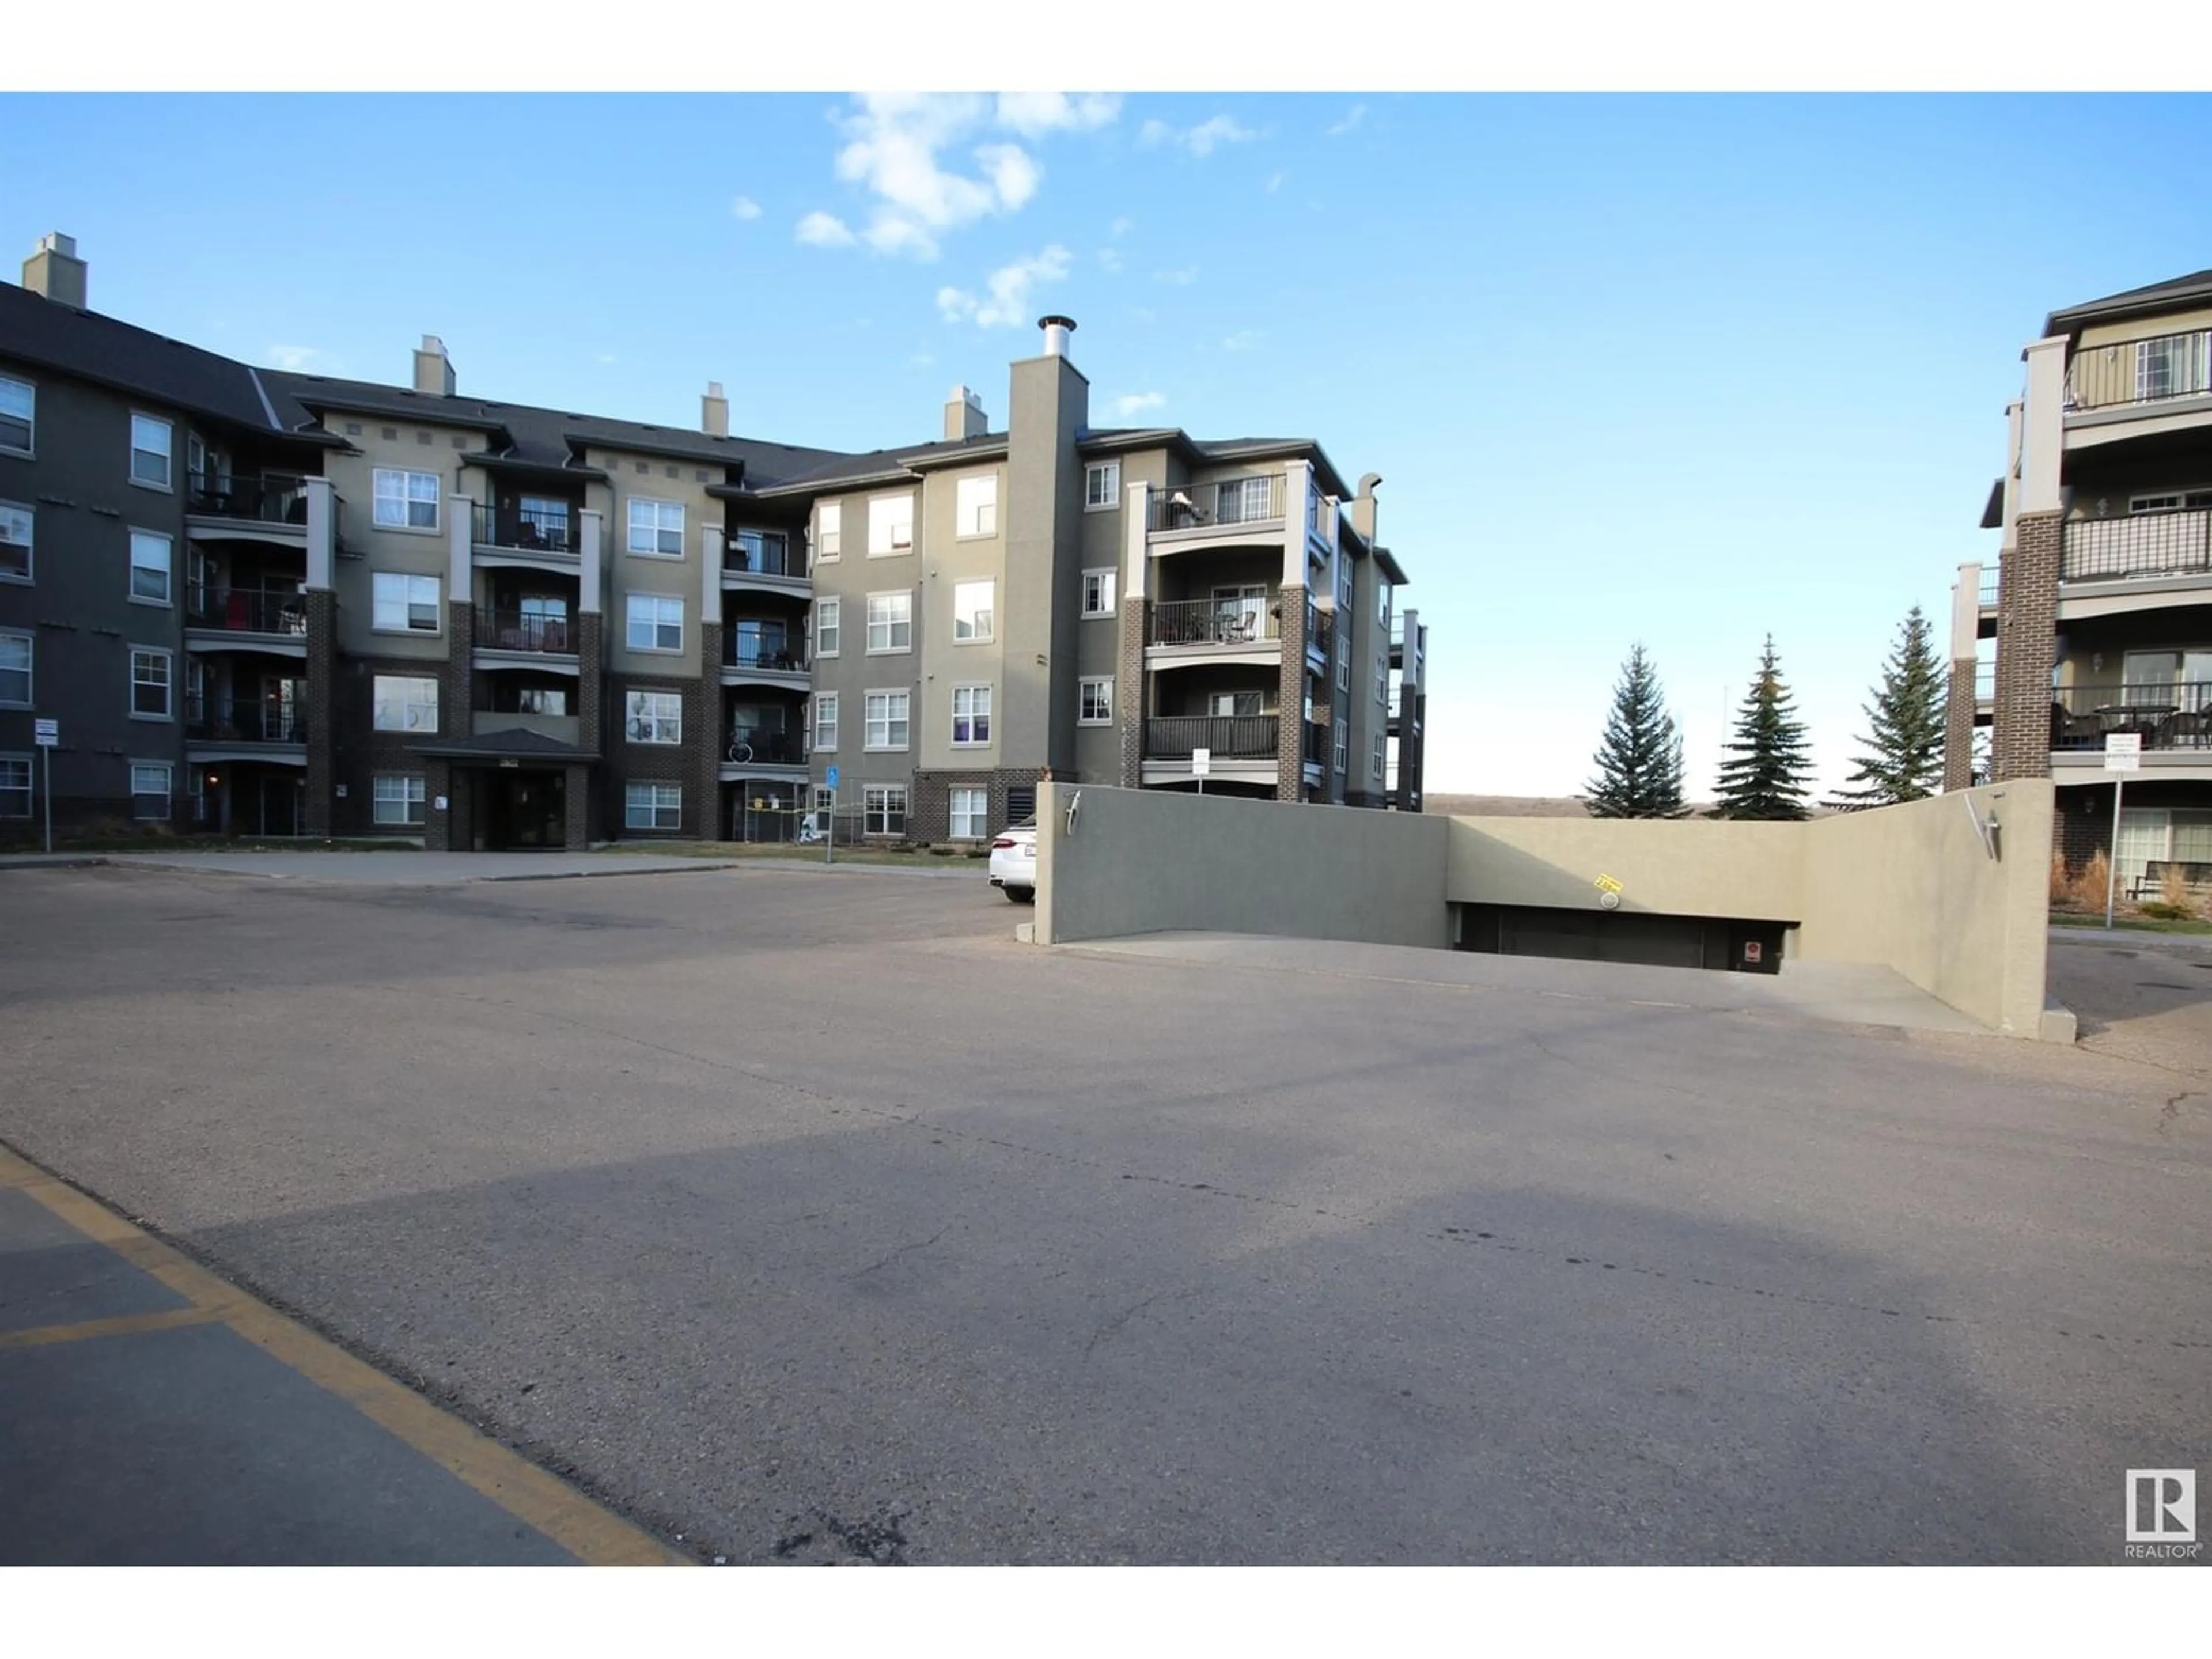 A pic from exterior of the house or condo for #410 636 MCALLISTER LO SW, Edmonton Alberta T6W1N4